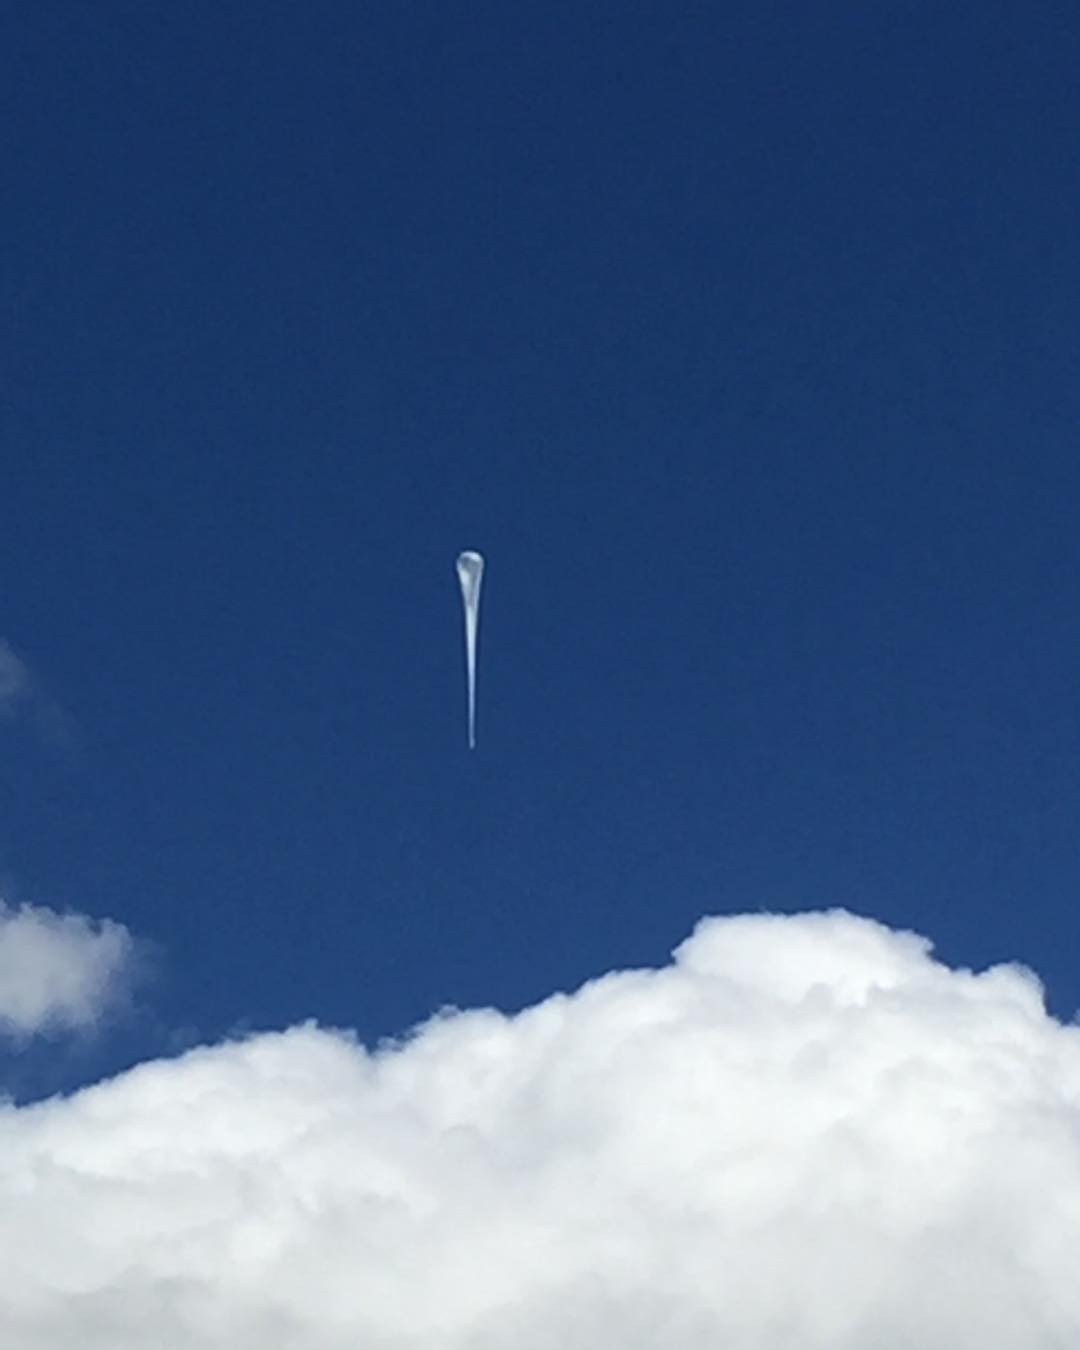 Image of the balloon ascending as seen from Sisters (Image: Valorie Grace Hallinan)